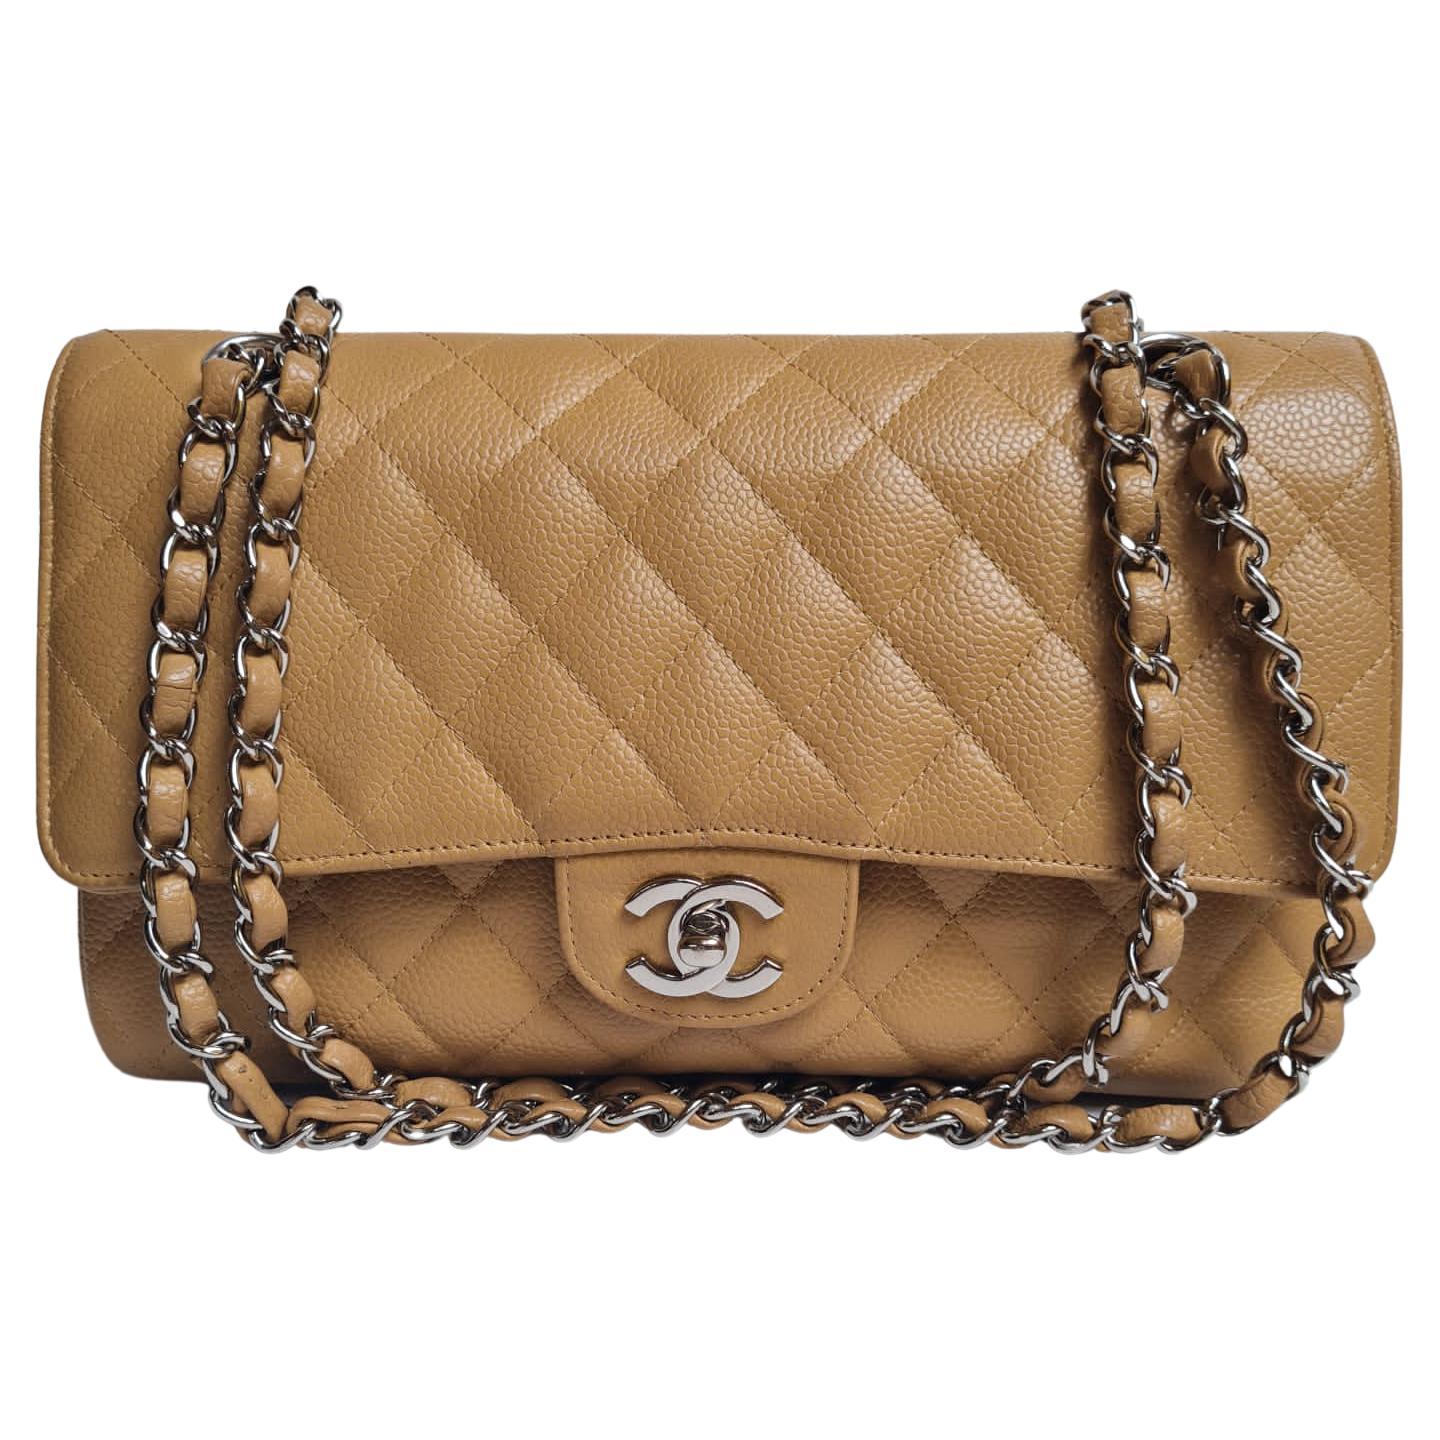 Chanel 19 leather crossbody bag Chanel Camel in Leather  24034830